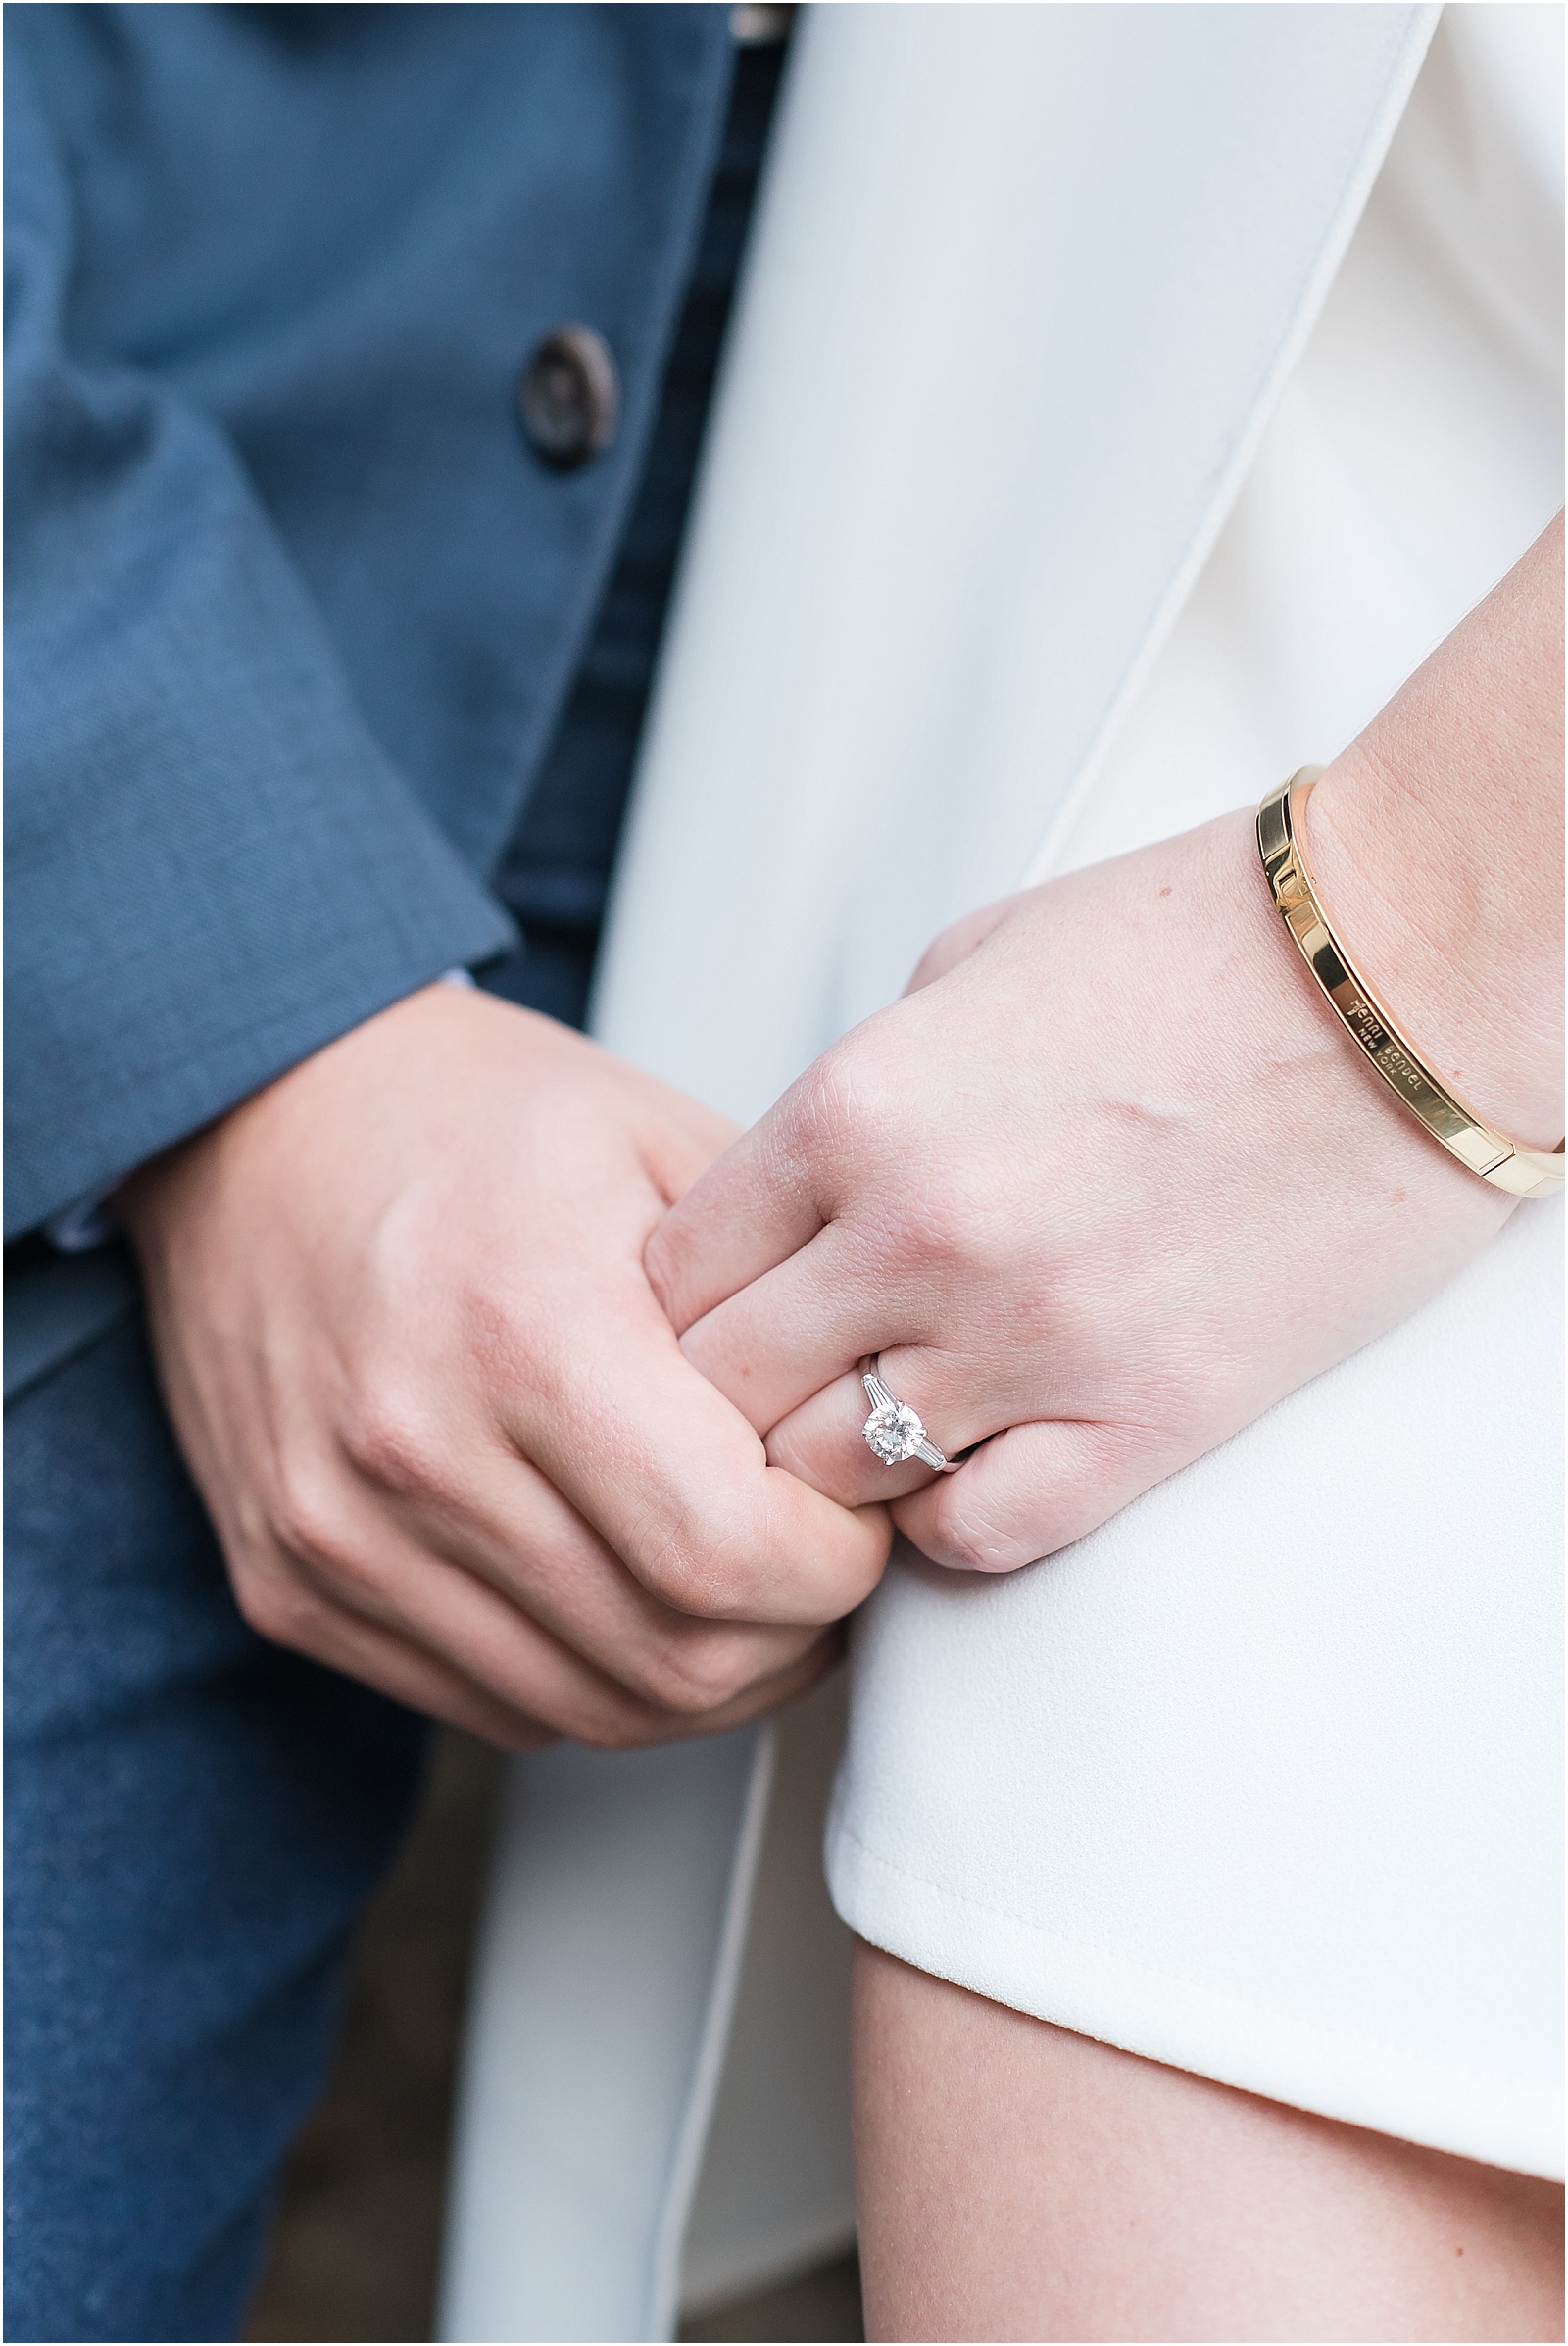 michelle and sara photography, saxapahaw, the rivermill lofts, chic engagement outfit, chic engagement session, saxapahaw engagement session, navy blue suit, brick arched backgroung, north carolina engagement, nc engagement, nc engagement photographer, 2018 bride, 2018 wedding, detail shot, engagement ring